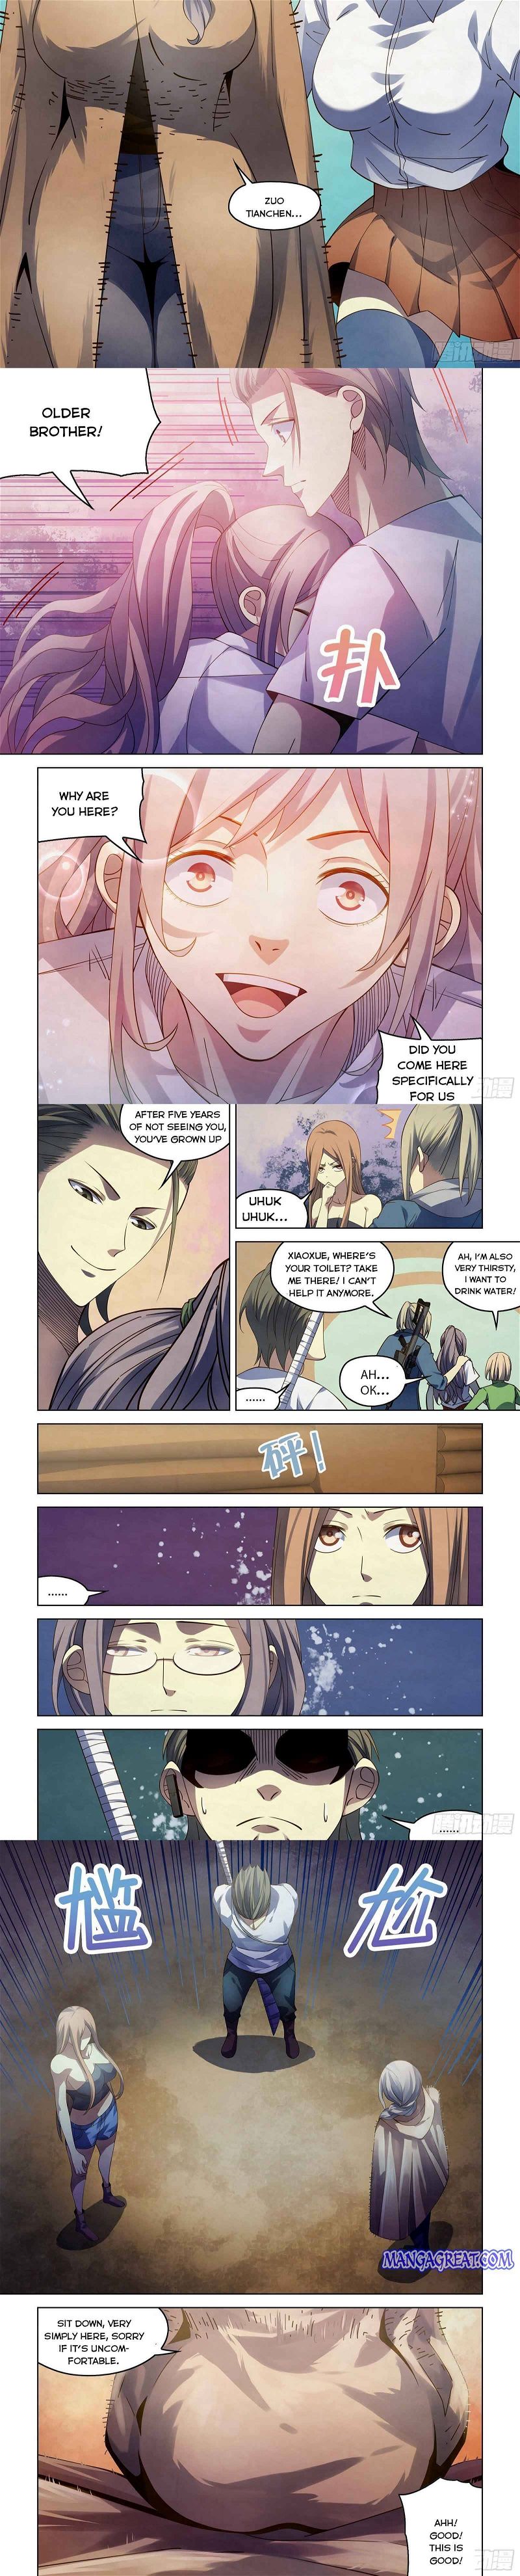 The Last Human Chapter 387 page 4